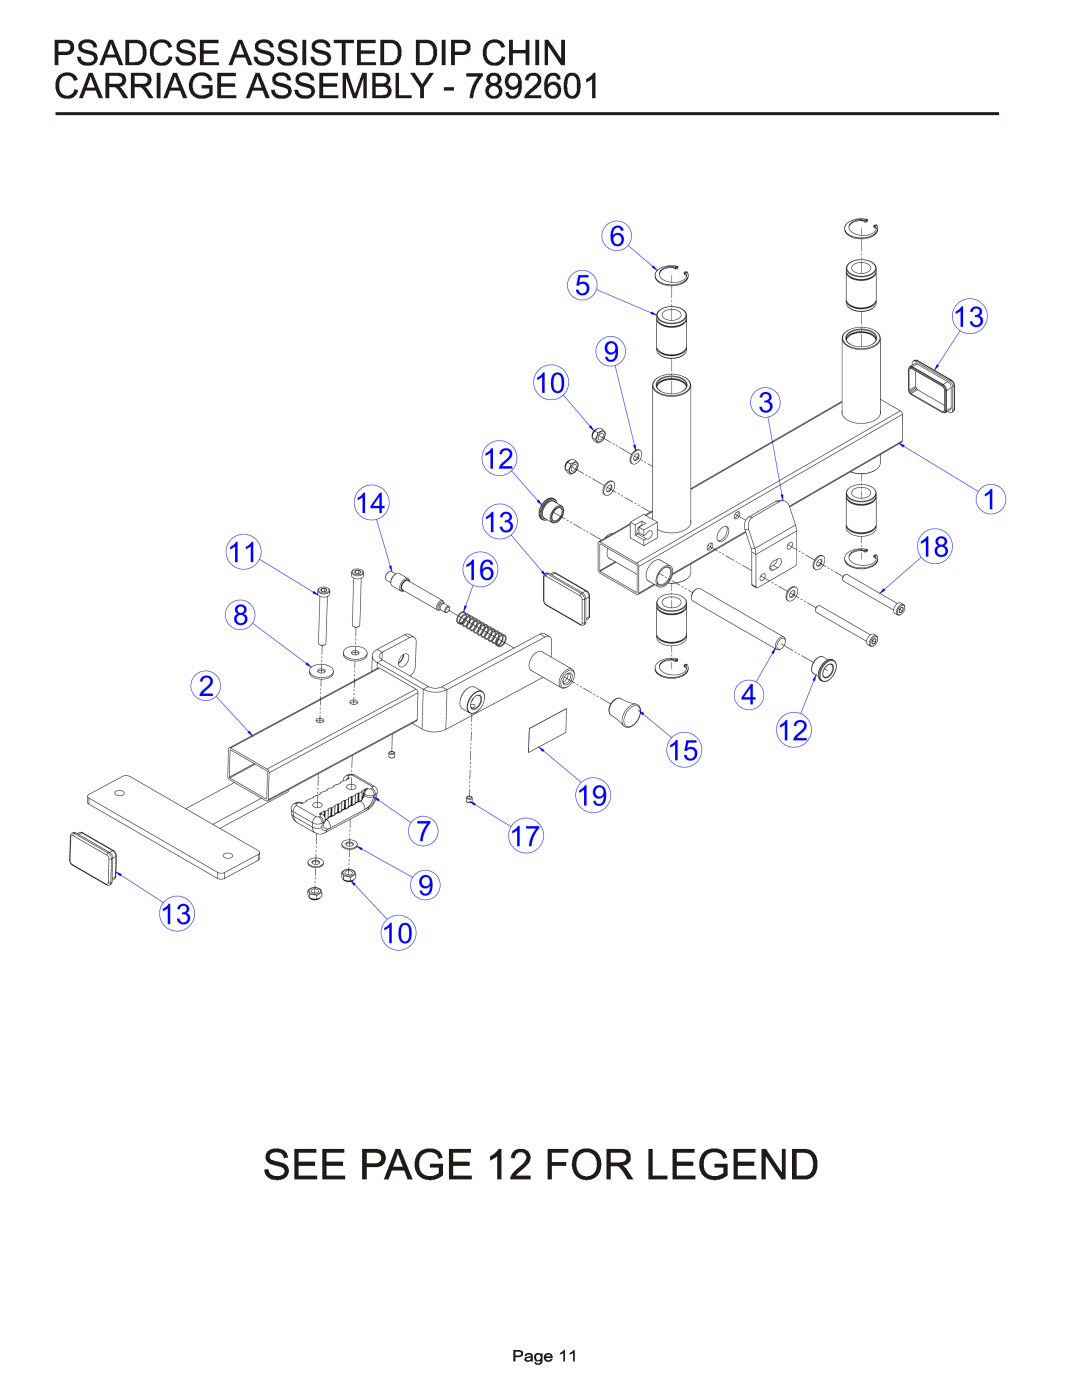 Life Fitness PSADCSE manual SEE PAGE 12 FOR LEGEND, Psadcse Assisted Dip Chin Carriage Assembly, Page 